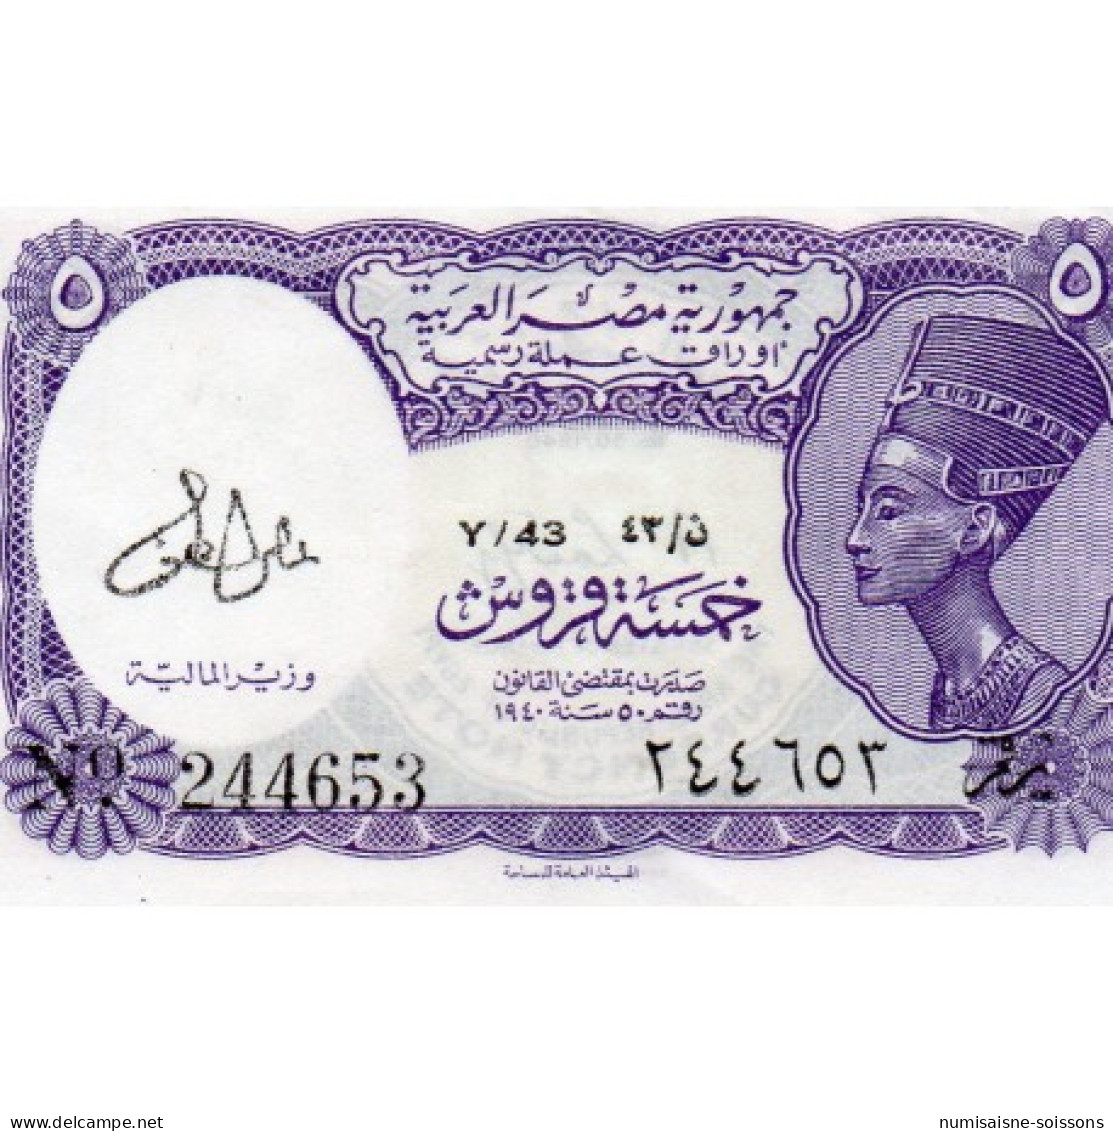 EGYPTE - PICK 182 G - 5 PIASTRES - L.1940 (ND1971) - Sign A.LOUTFY - SERIE 43 - SUP - Egypt